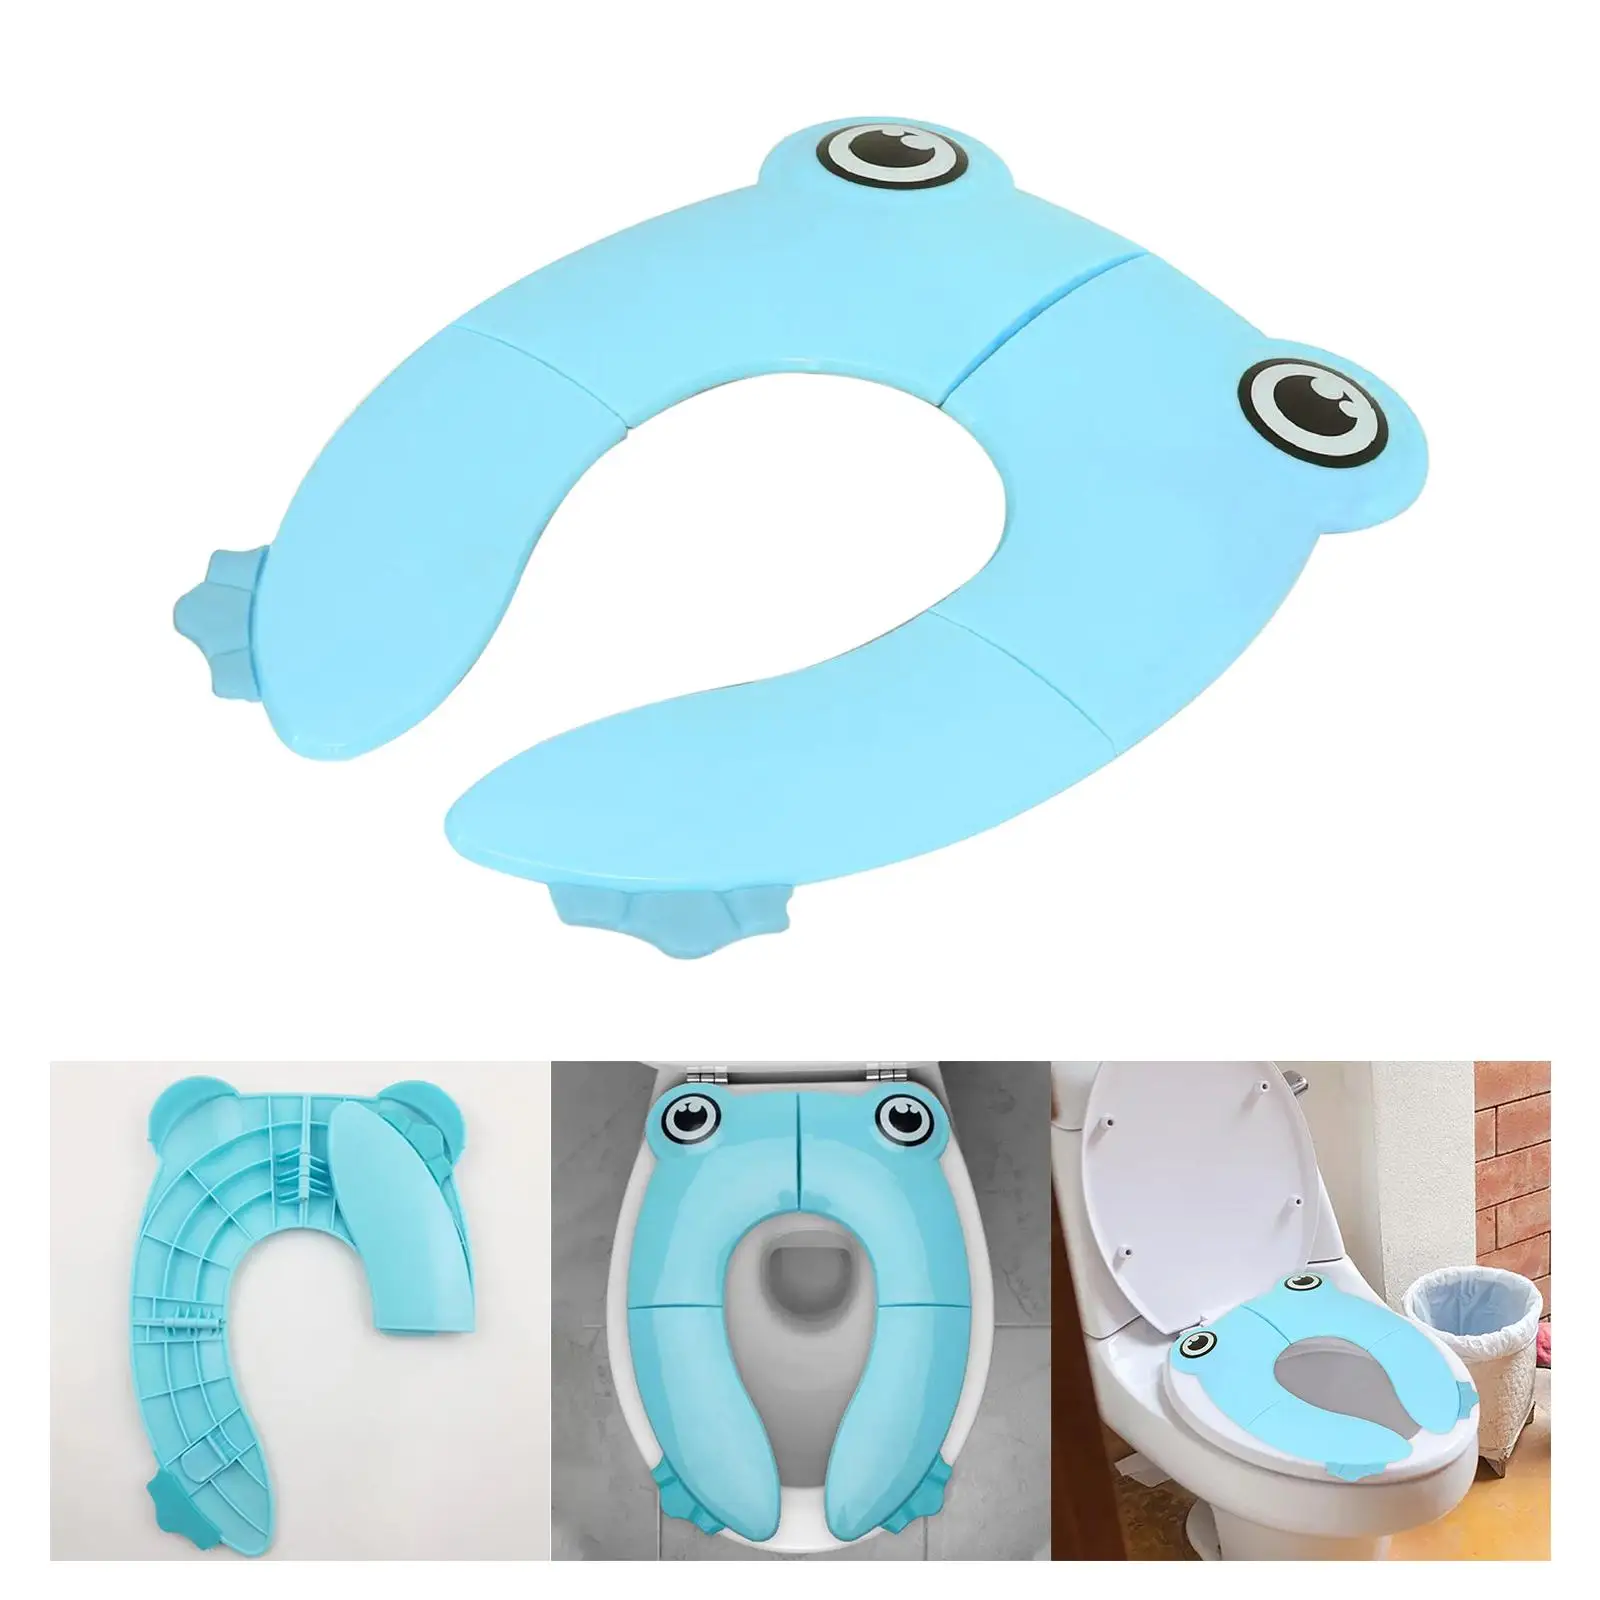 Toilet Cushion Folding Stable with Storage Bag Oval Reusable Comfortable Portable Potty Seat Pads for Traveling Toddler Kids